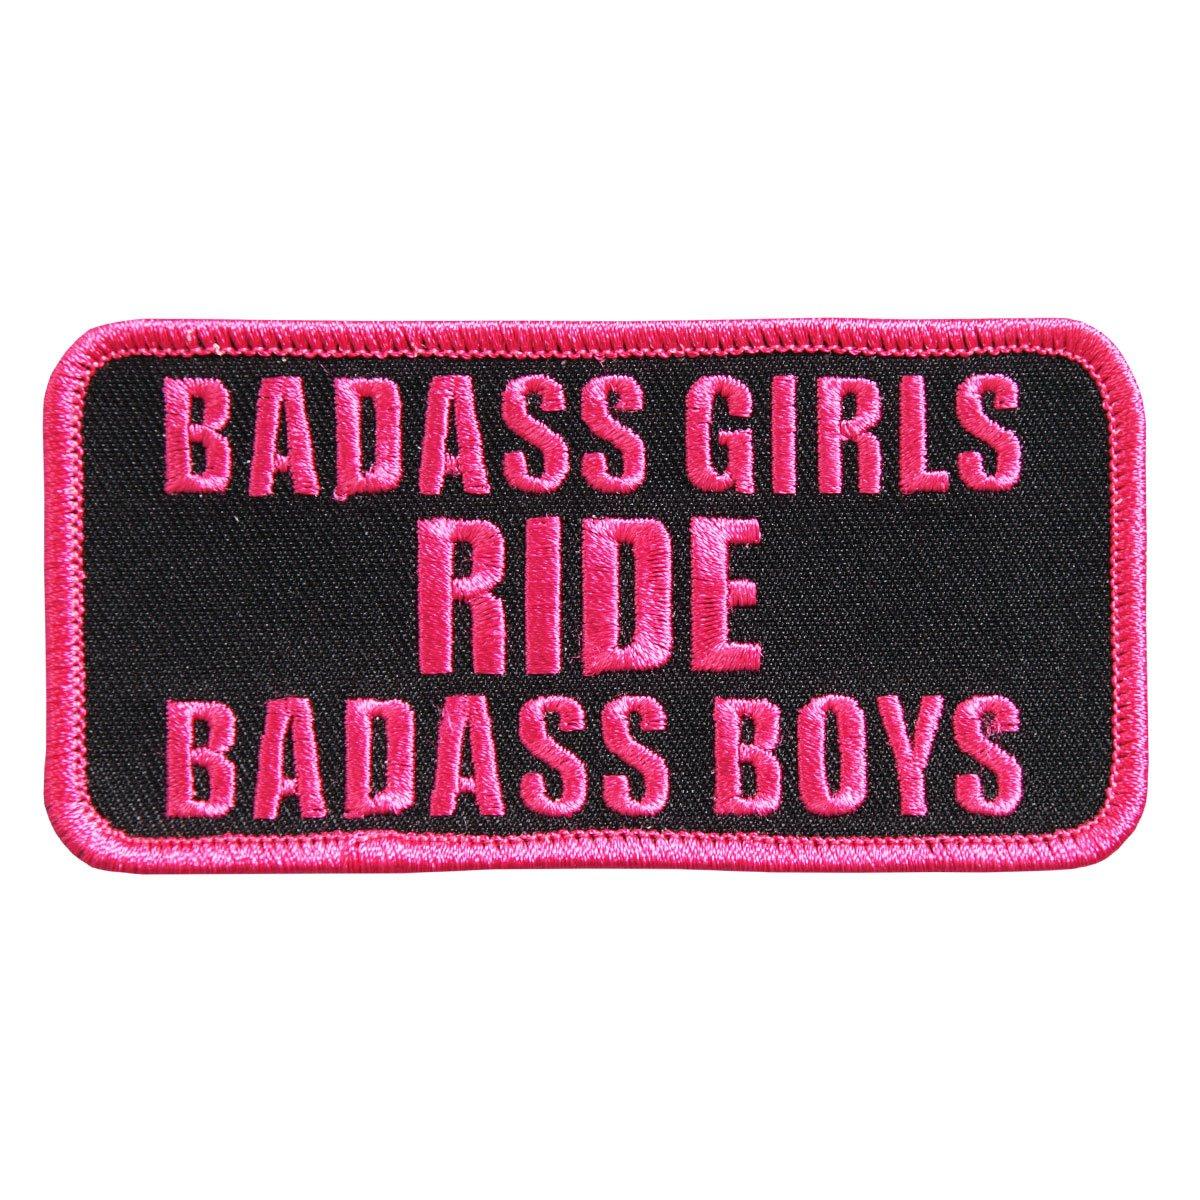 Hot Leathers Badass Girls Ride Embroidered 4" 4" X 2" Patch - American Legend Rider